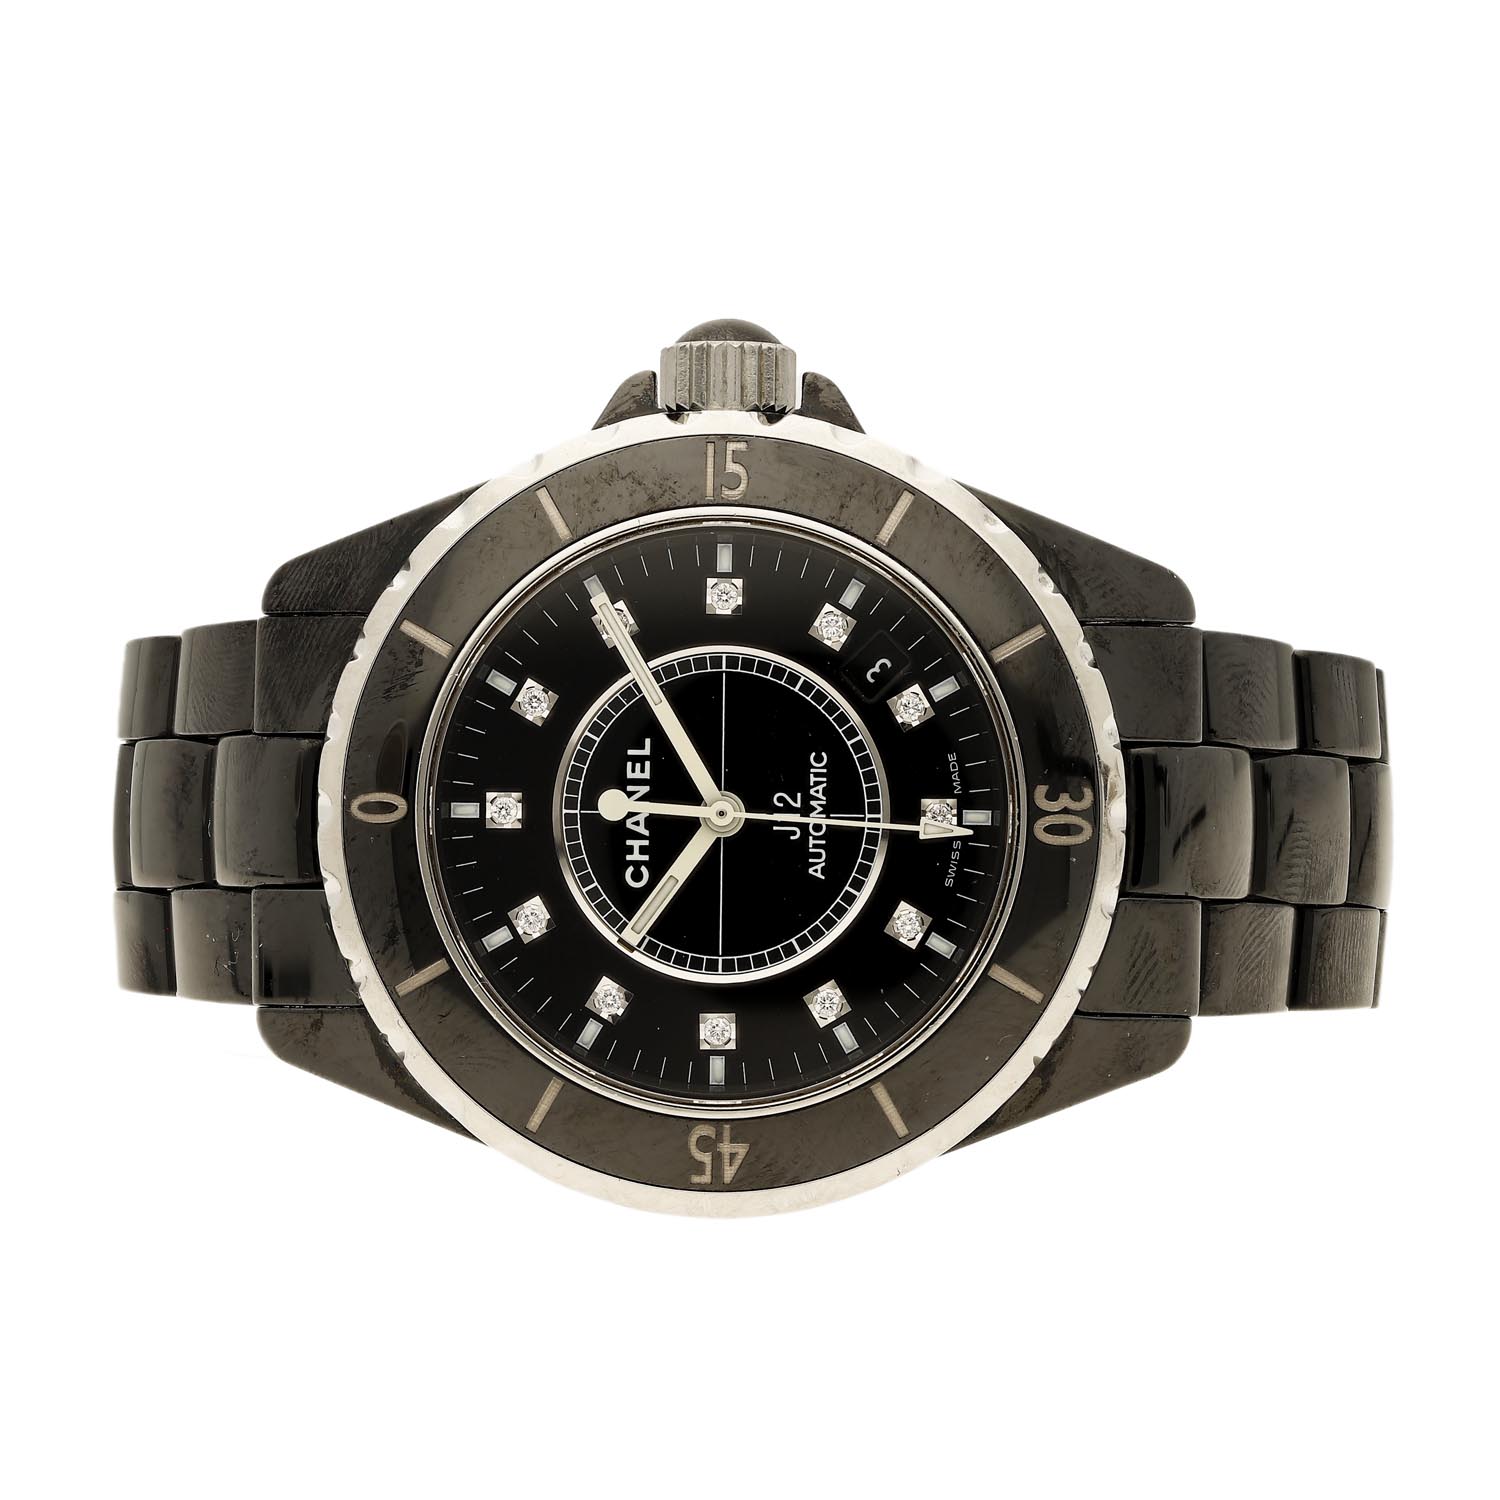 Chanel Updates Its Ceramic J12 Watch with a New Design and